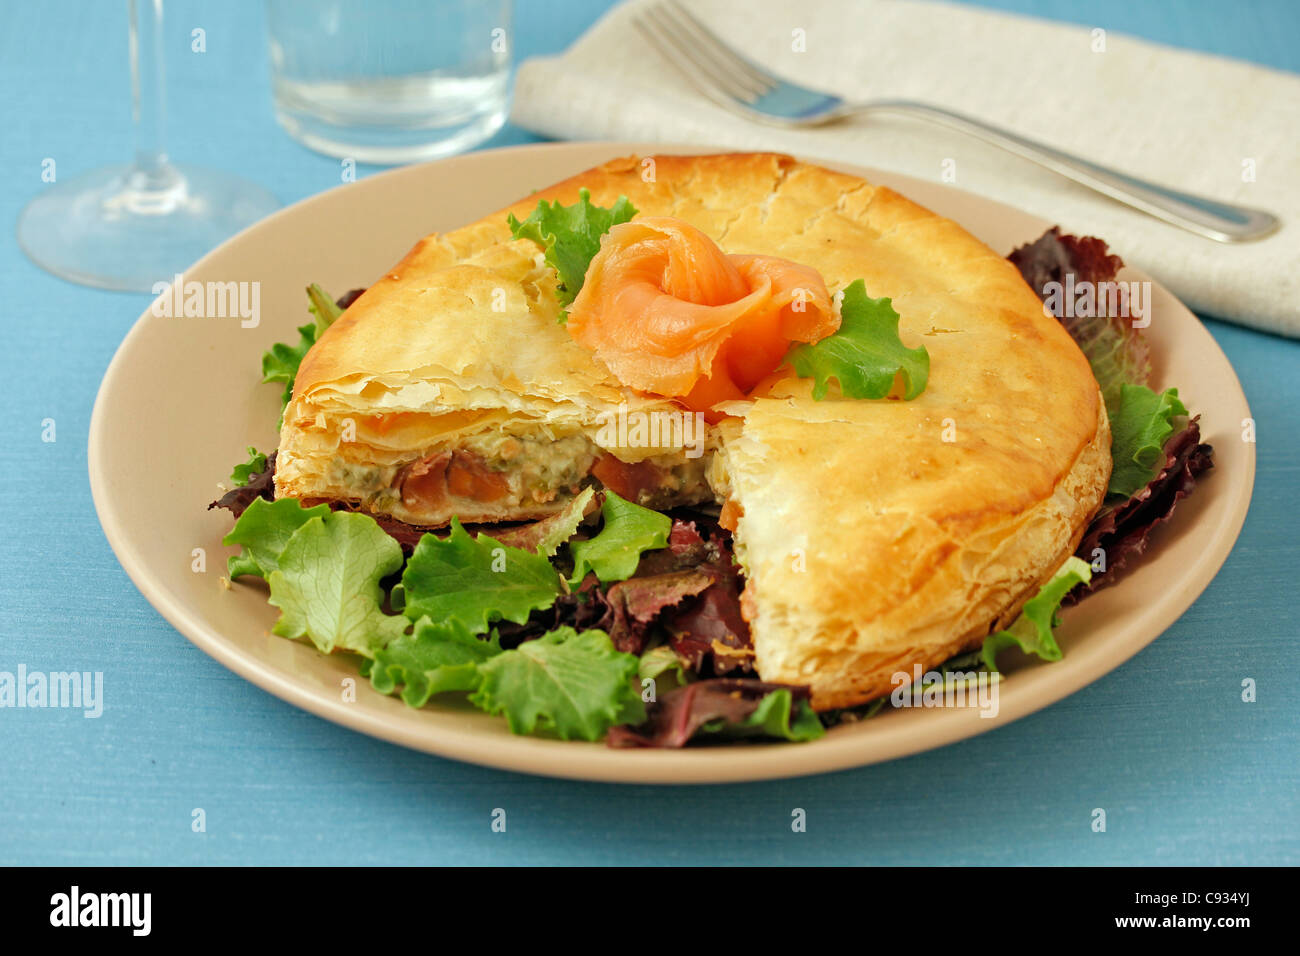 Puff pastry with salmon and scallops. Recipe available. Stock Photo